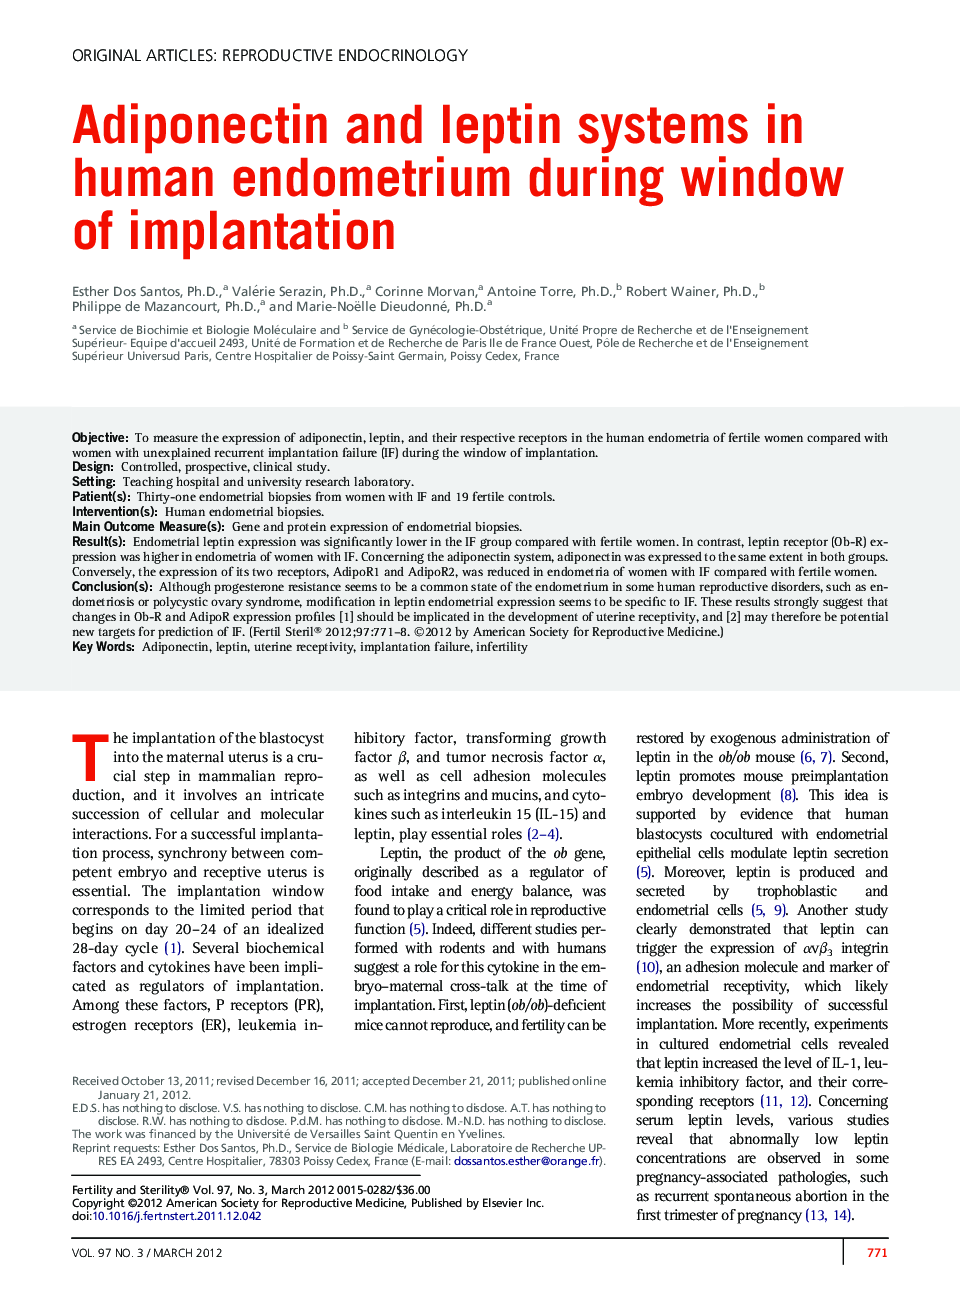 Adiponectin and leptin systems in human endometrium during window of implantation